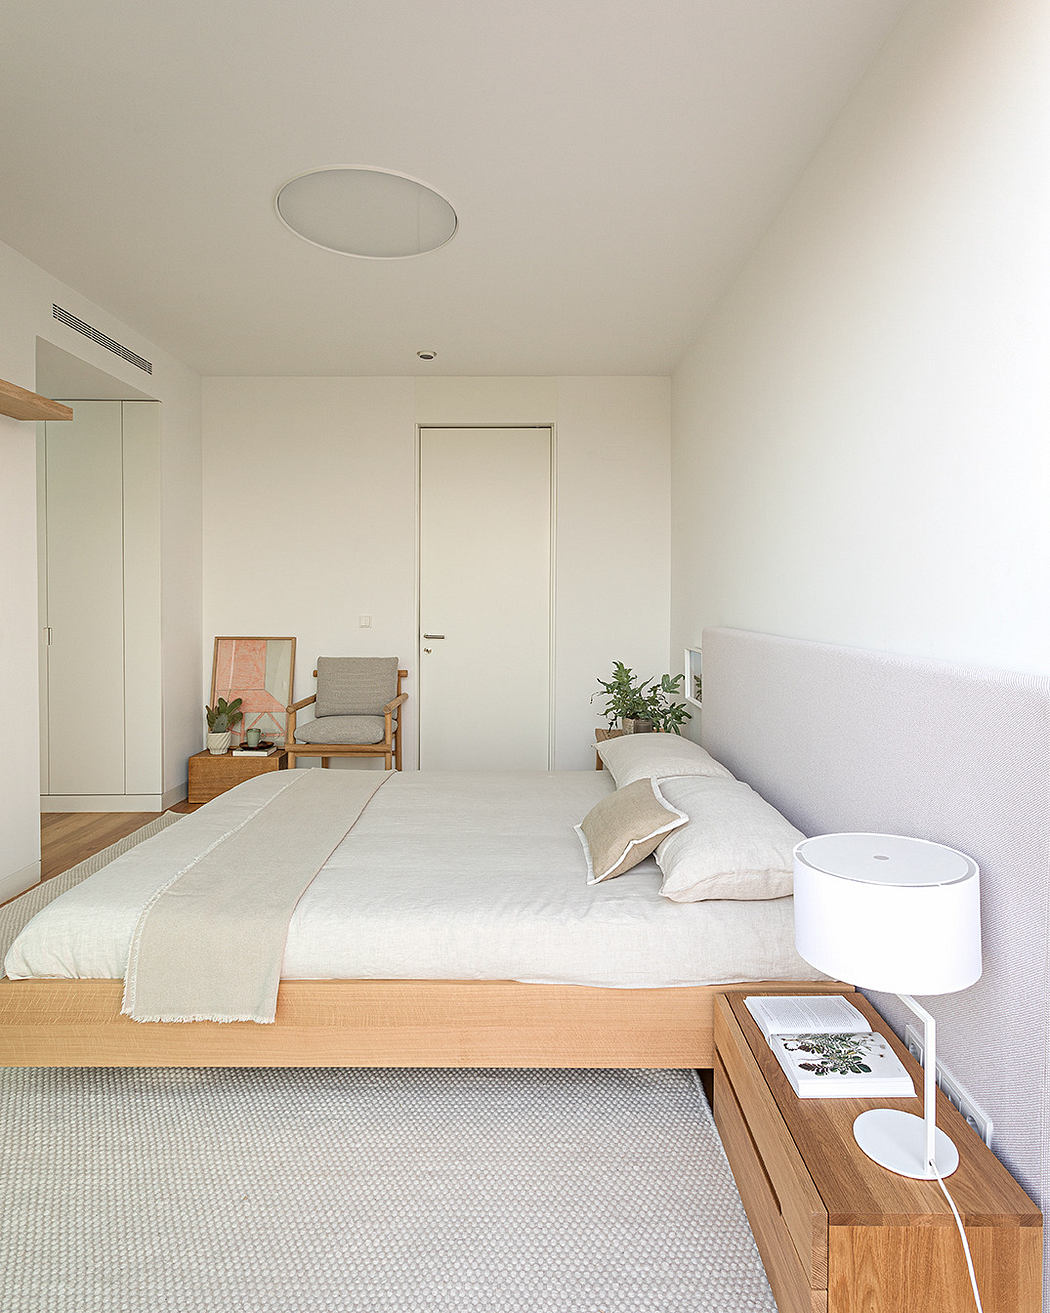 Minimalist bedroom with wooden bed, white bedding, and a modern lamp.